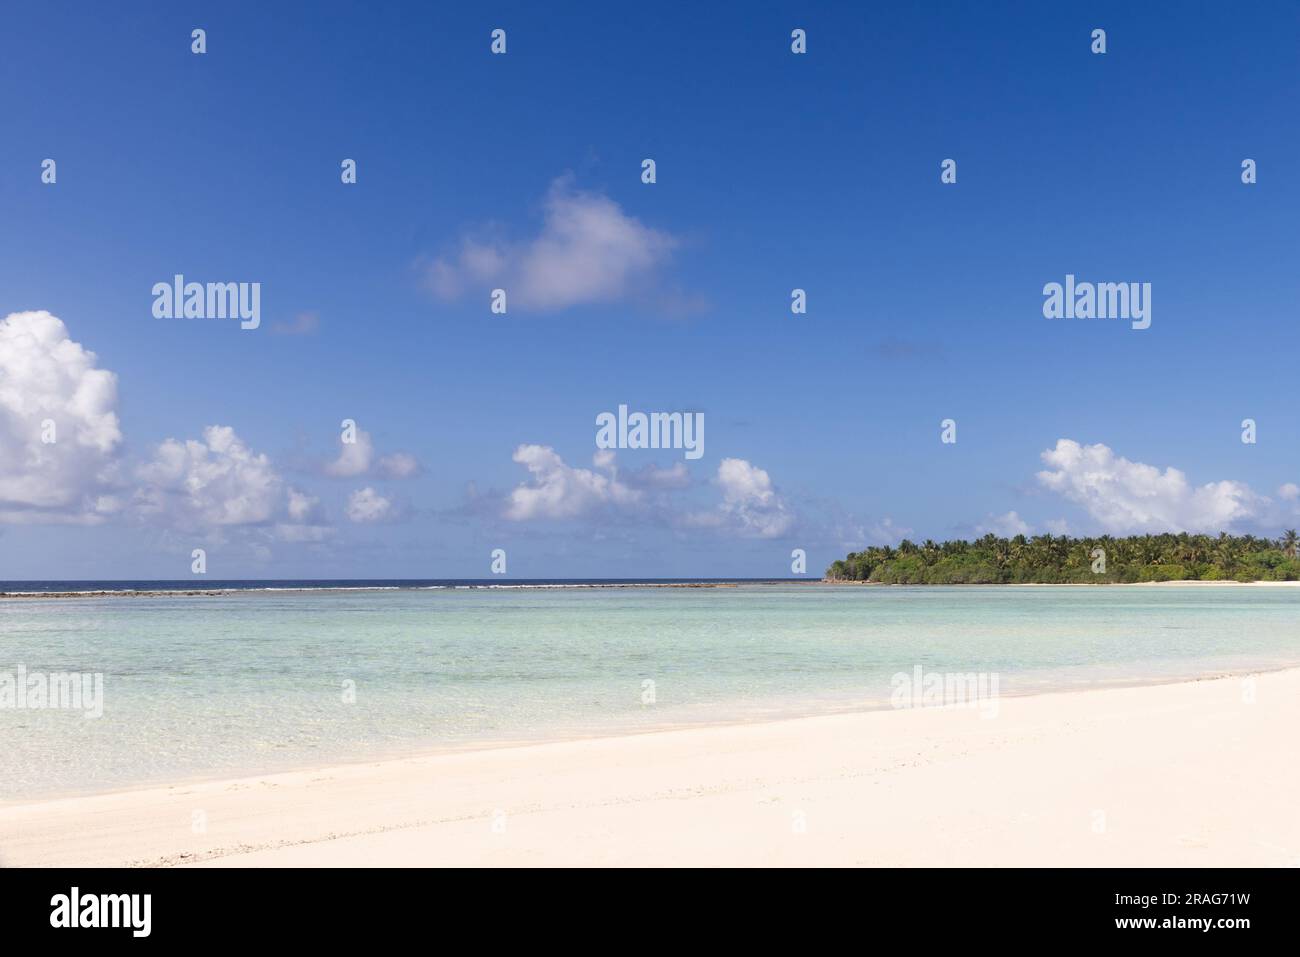 This beach is sun-believable Stock Photo